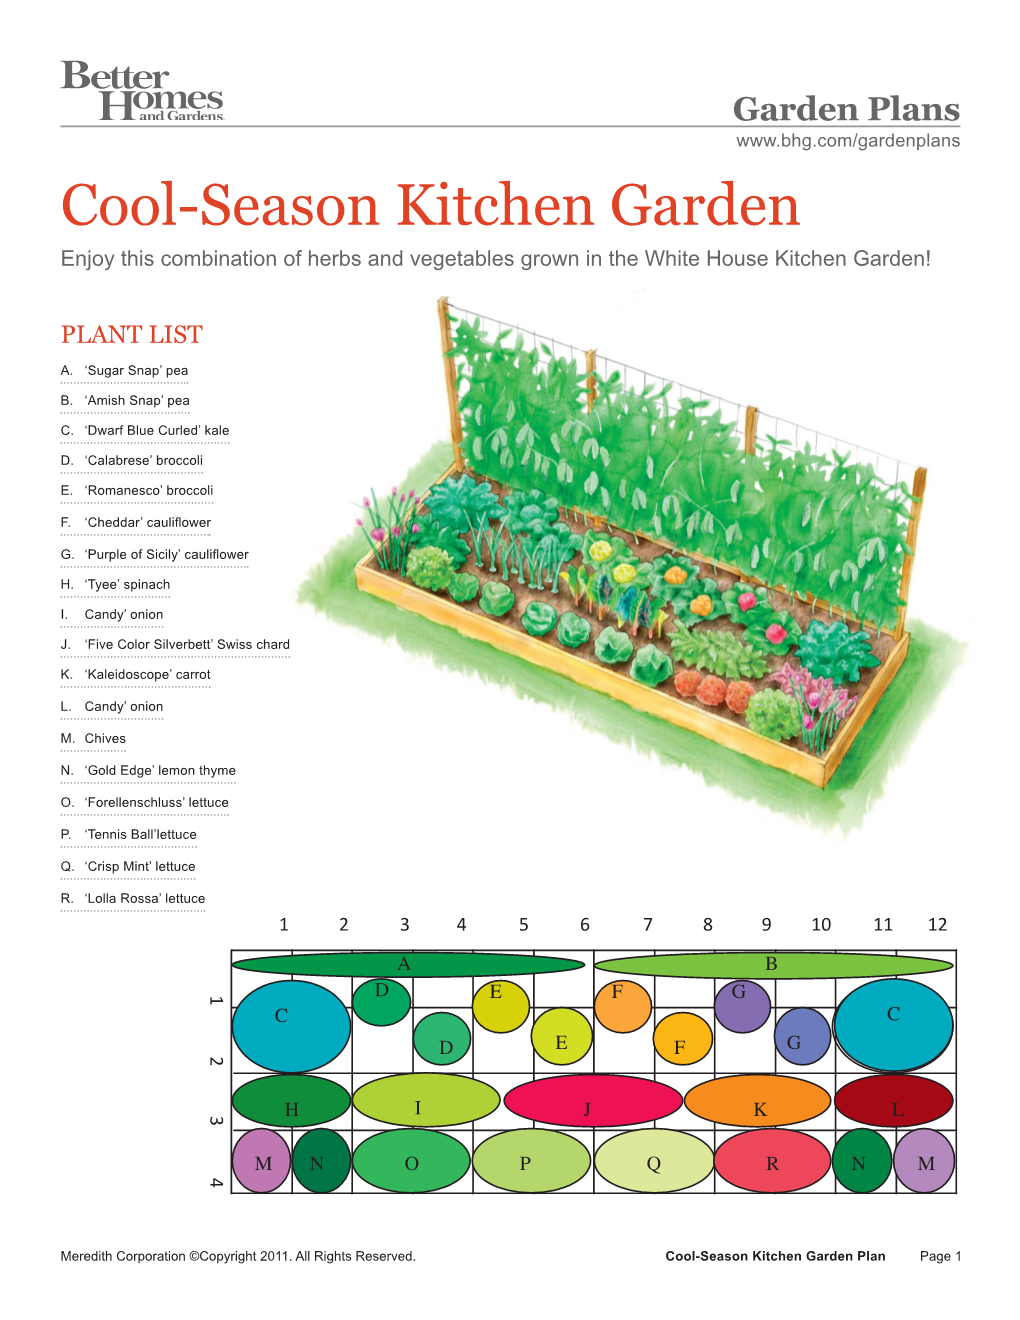 Cool-Season Kitchen Garden Enjoy This Combination of Herbs and Vegetables Grown in the White House Kitchen Garden!